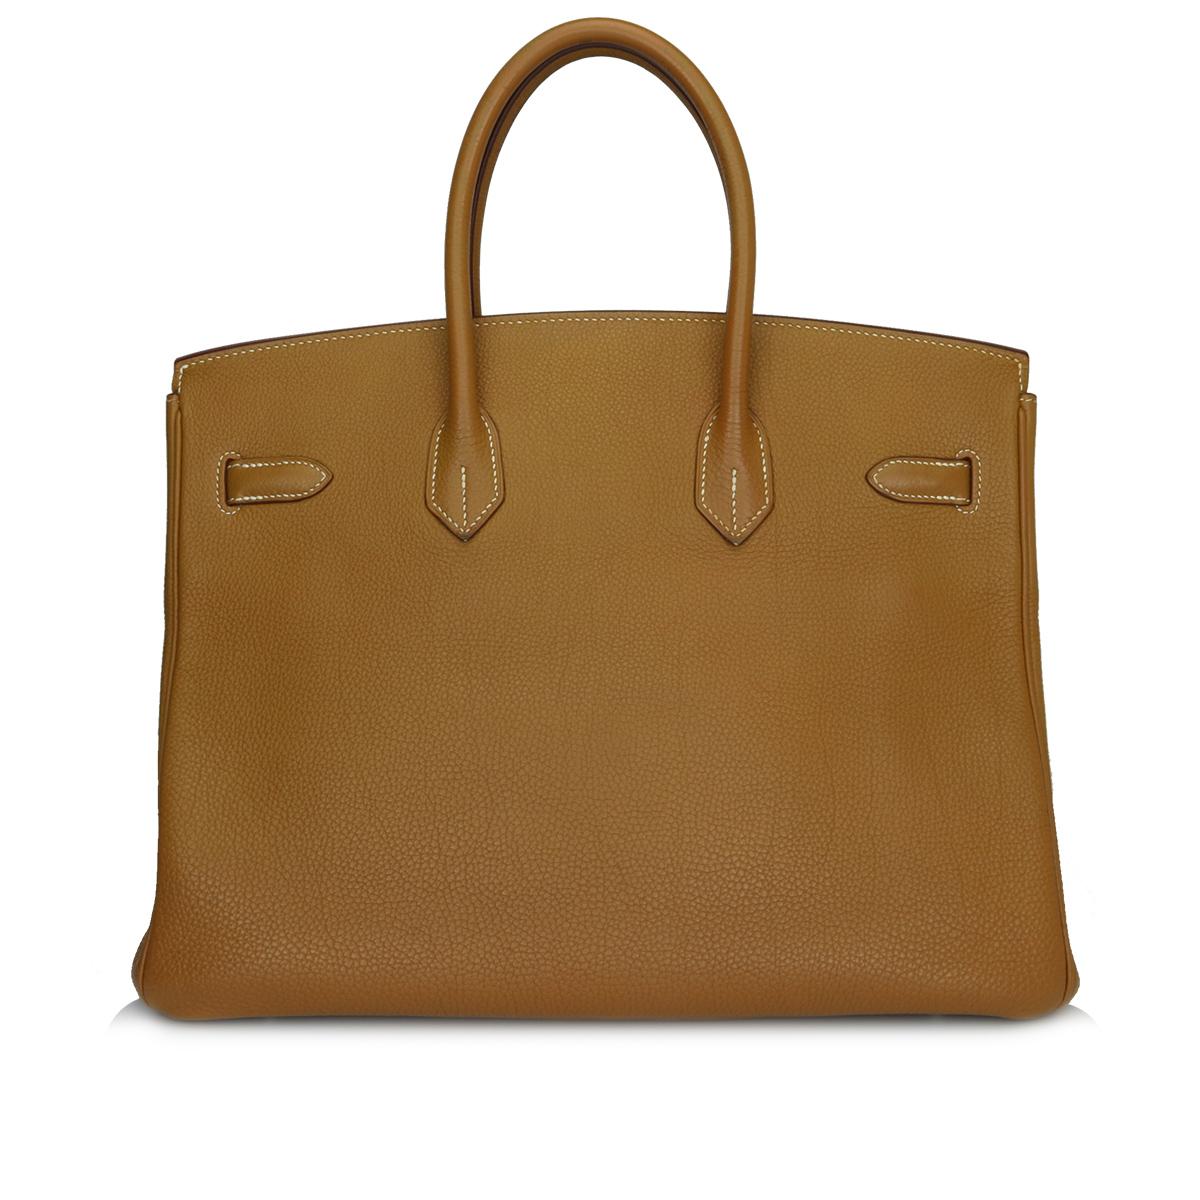 Hermès Birkin 35cm Gold Togo Leather with Palladium Hardware Stamp K_Year 2007.

This bag is still in good condition, it has been well looked after and the leather feels luxuriously soft. A truly stunning gold-brown colour combined with beautiful